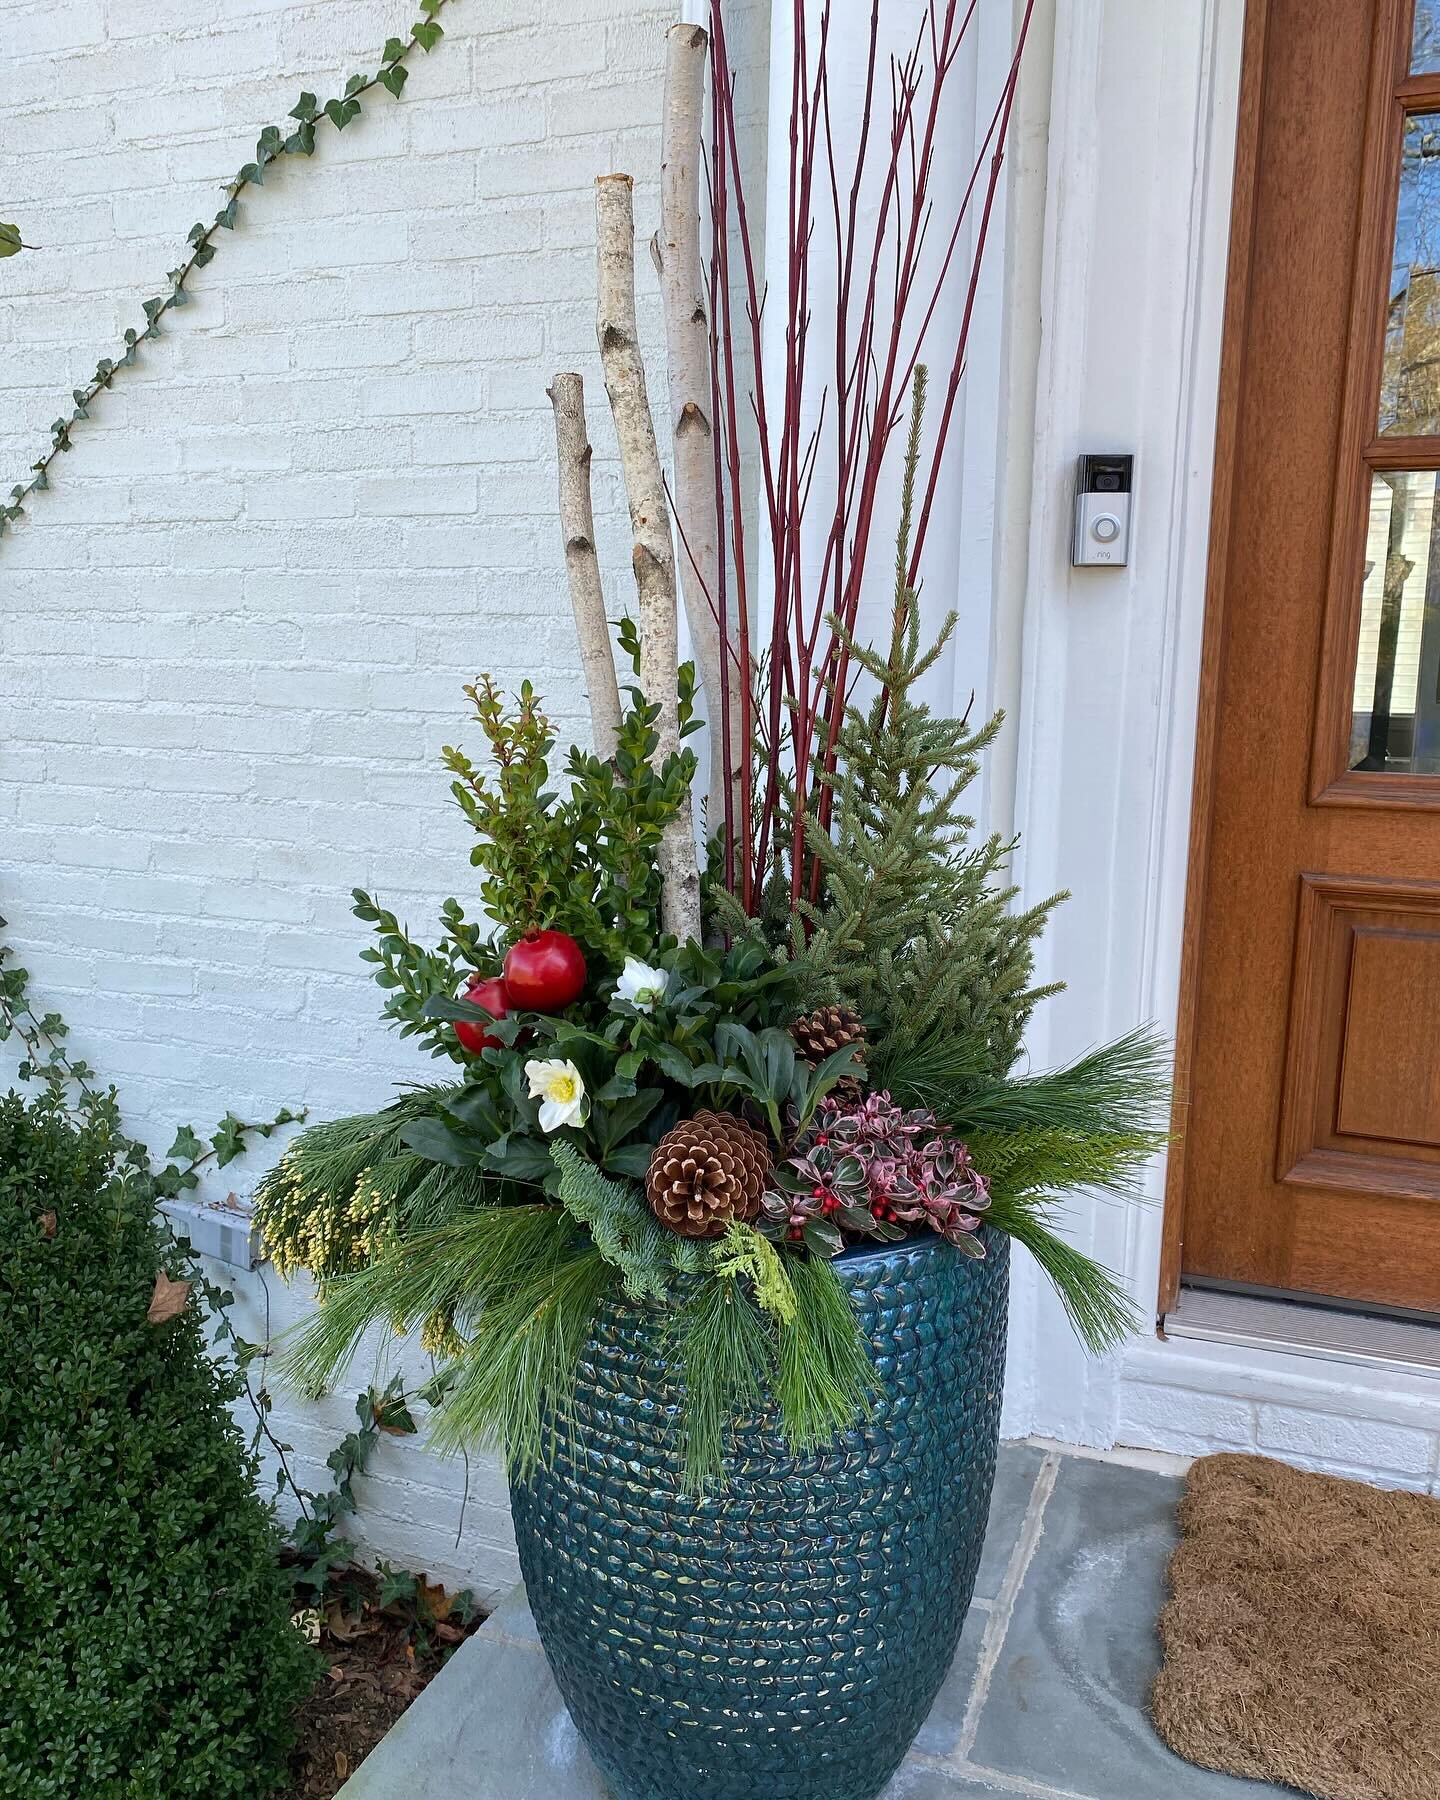 Now that the dahlias are dug, washed, divided and finally stored for the winter, we have a minute to look back at some pictures of our winter container arrangements. It&rsquo;s been a busy season and the creativity came out in full force!